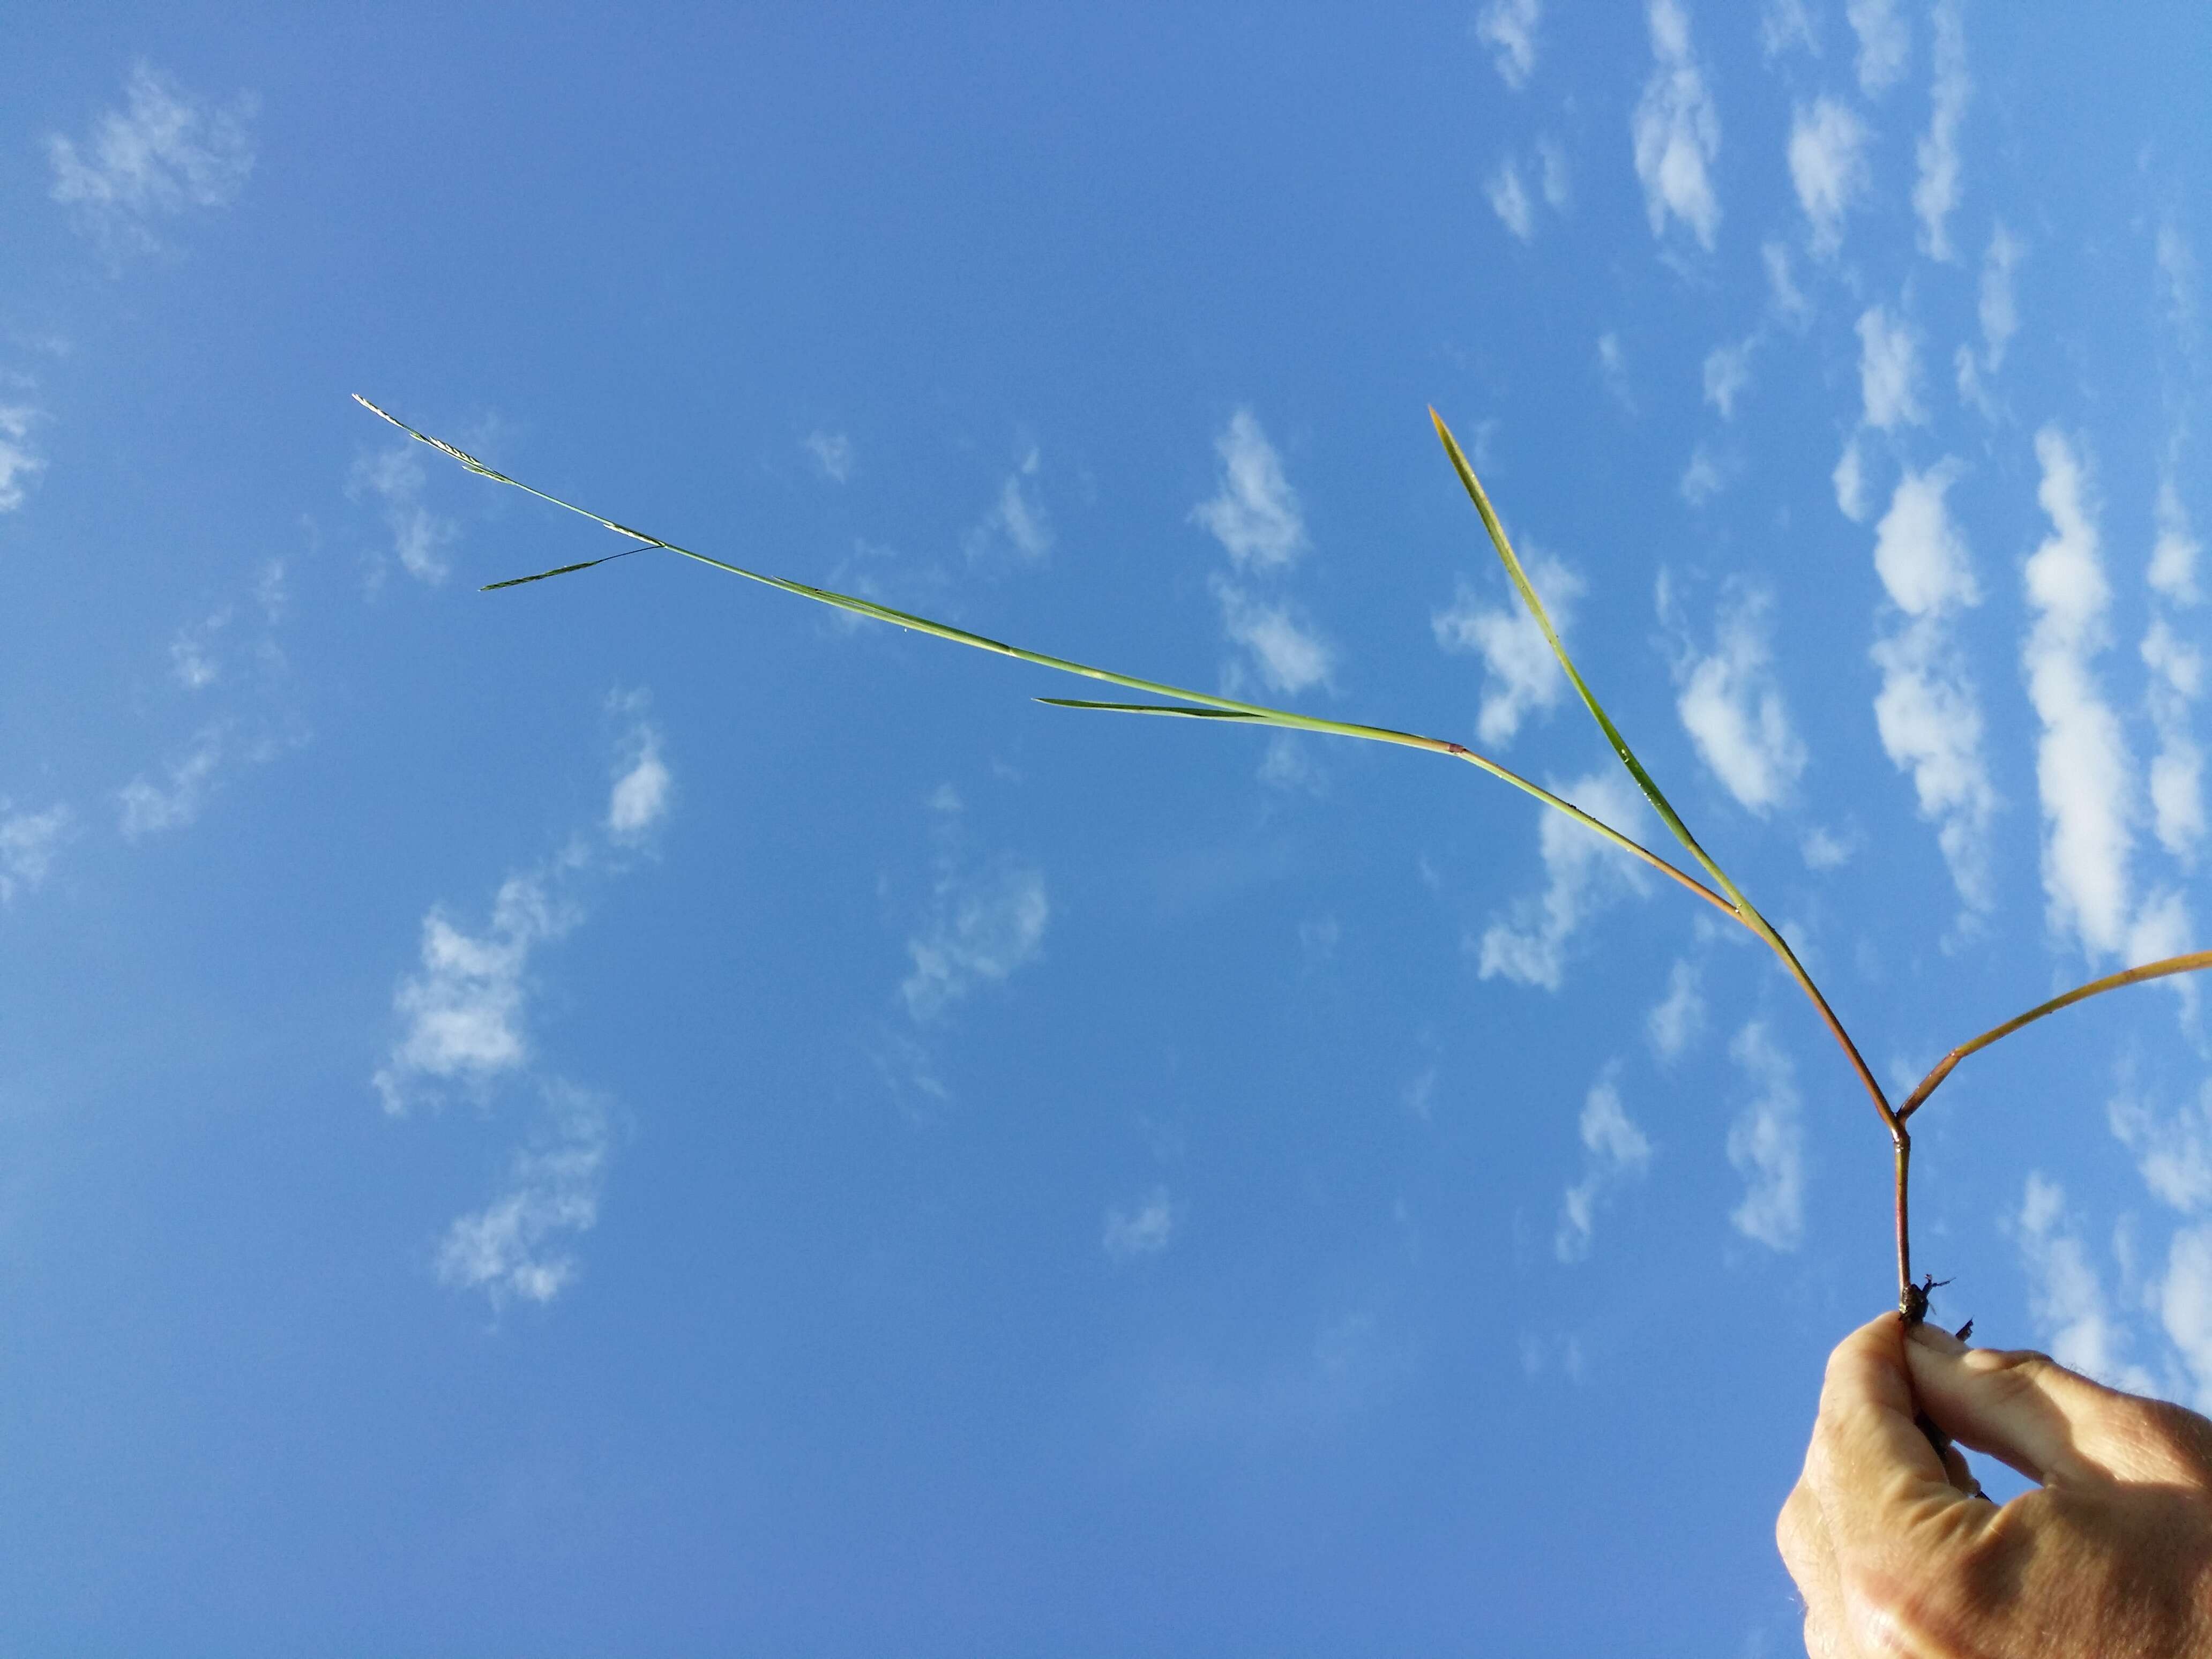 Image of flote-grass, floating sweet-grass